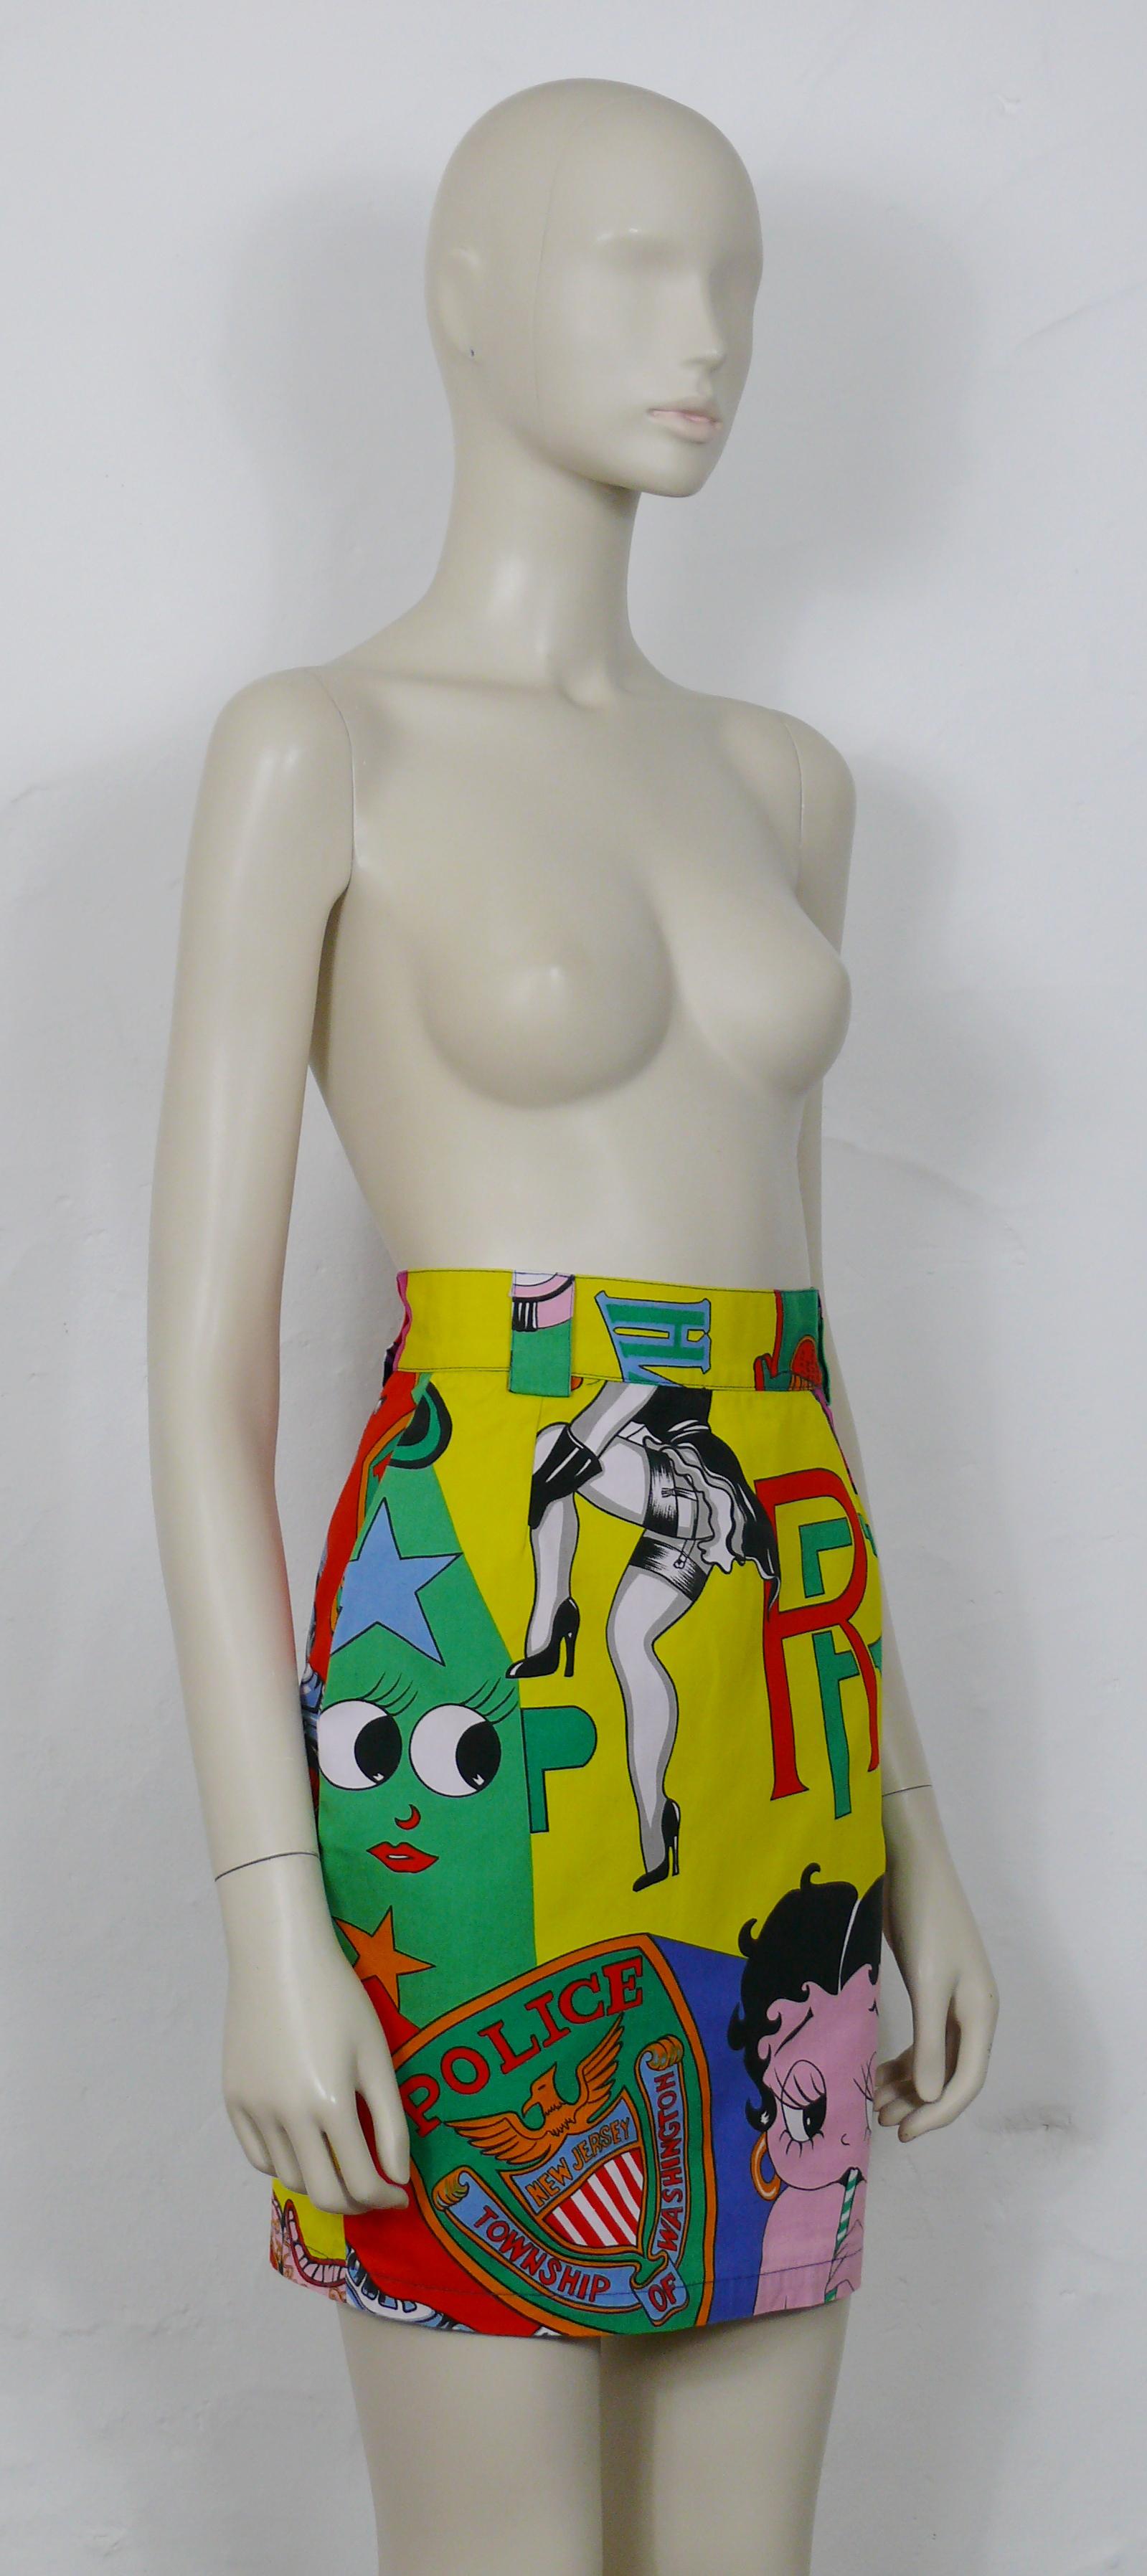 VERSACE JEANS COUTURE vintage skirt featuring an opulent and multicolored print with BEETY BOOPs, motorcycle, HARLEY DAVIDSON and ROLLS-ROYCE logos, City of Washington police insigna...

Back zippered and button closure.
Belt loops.
No